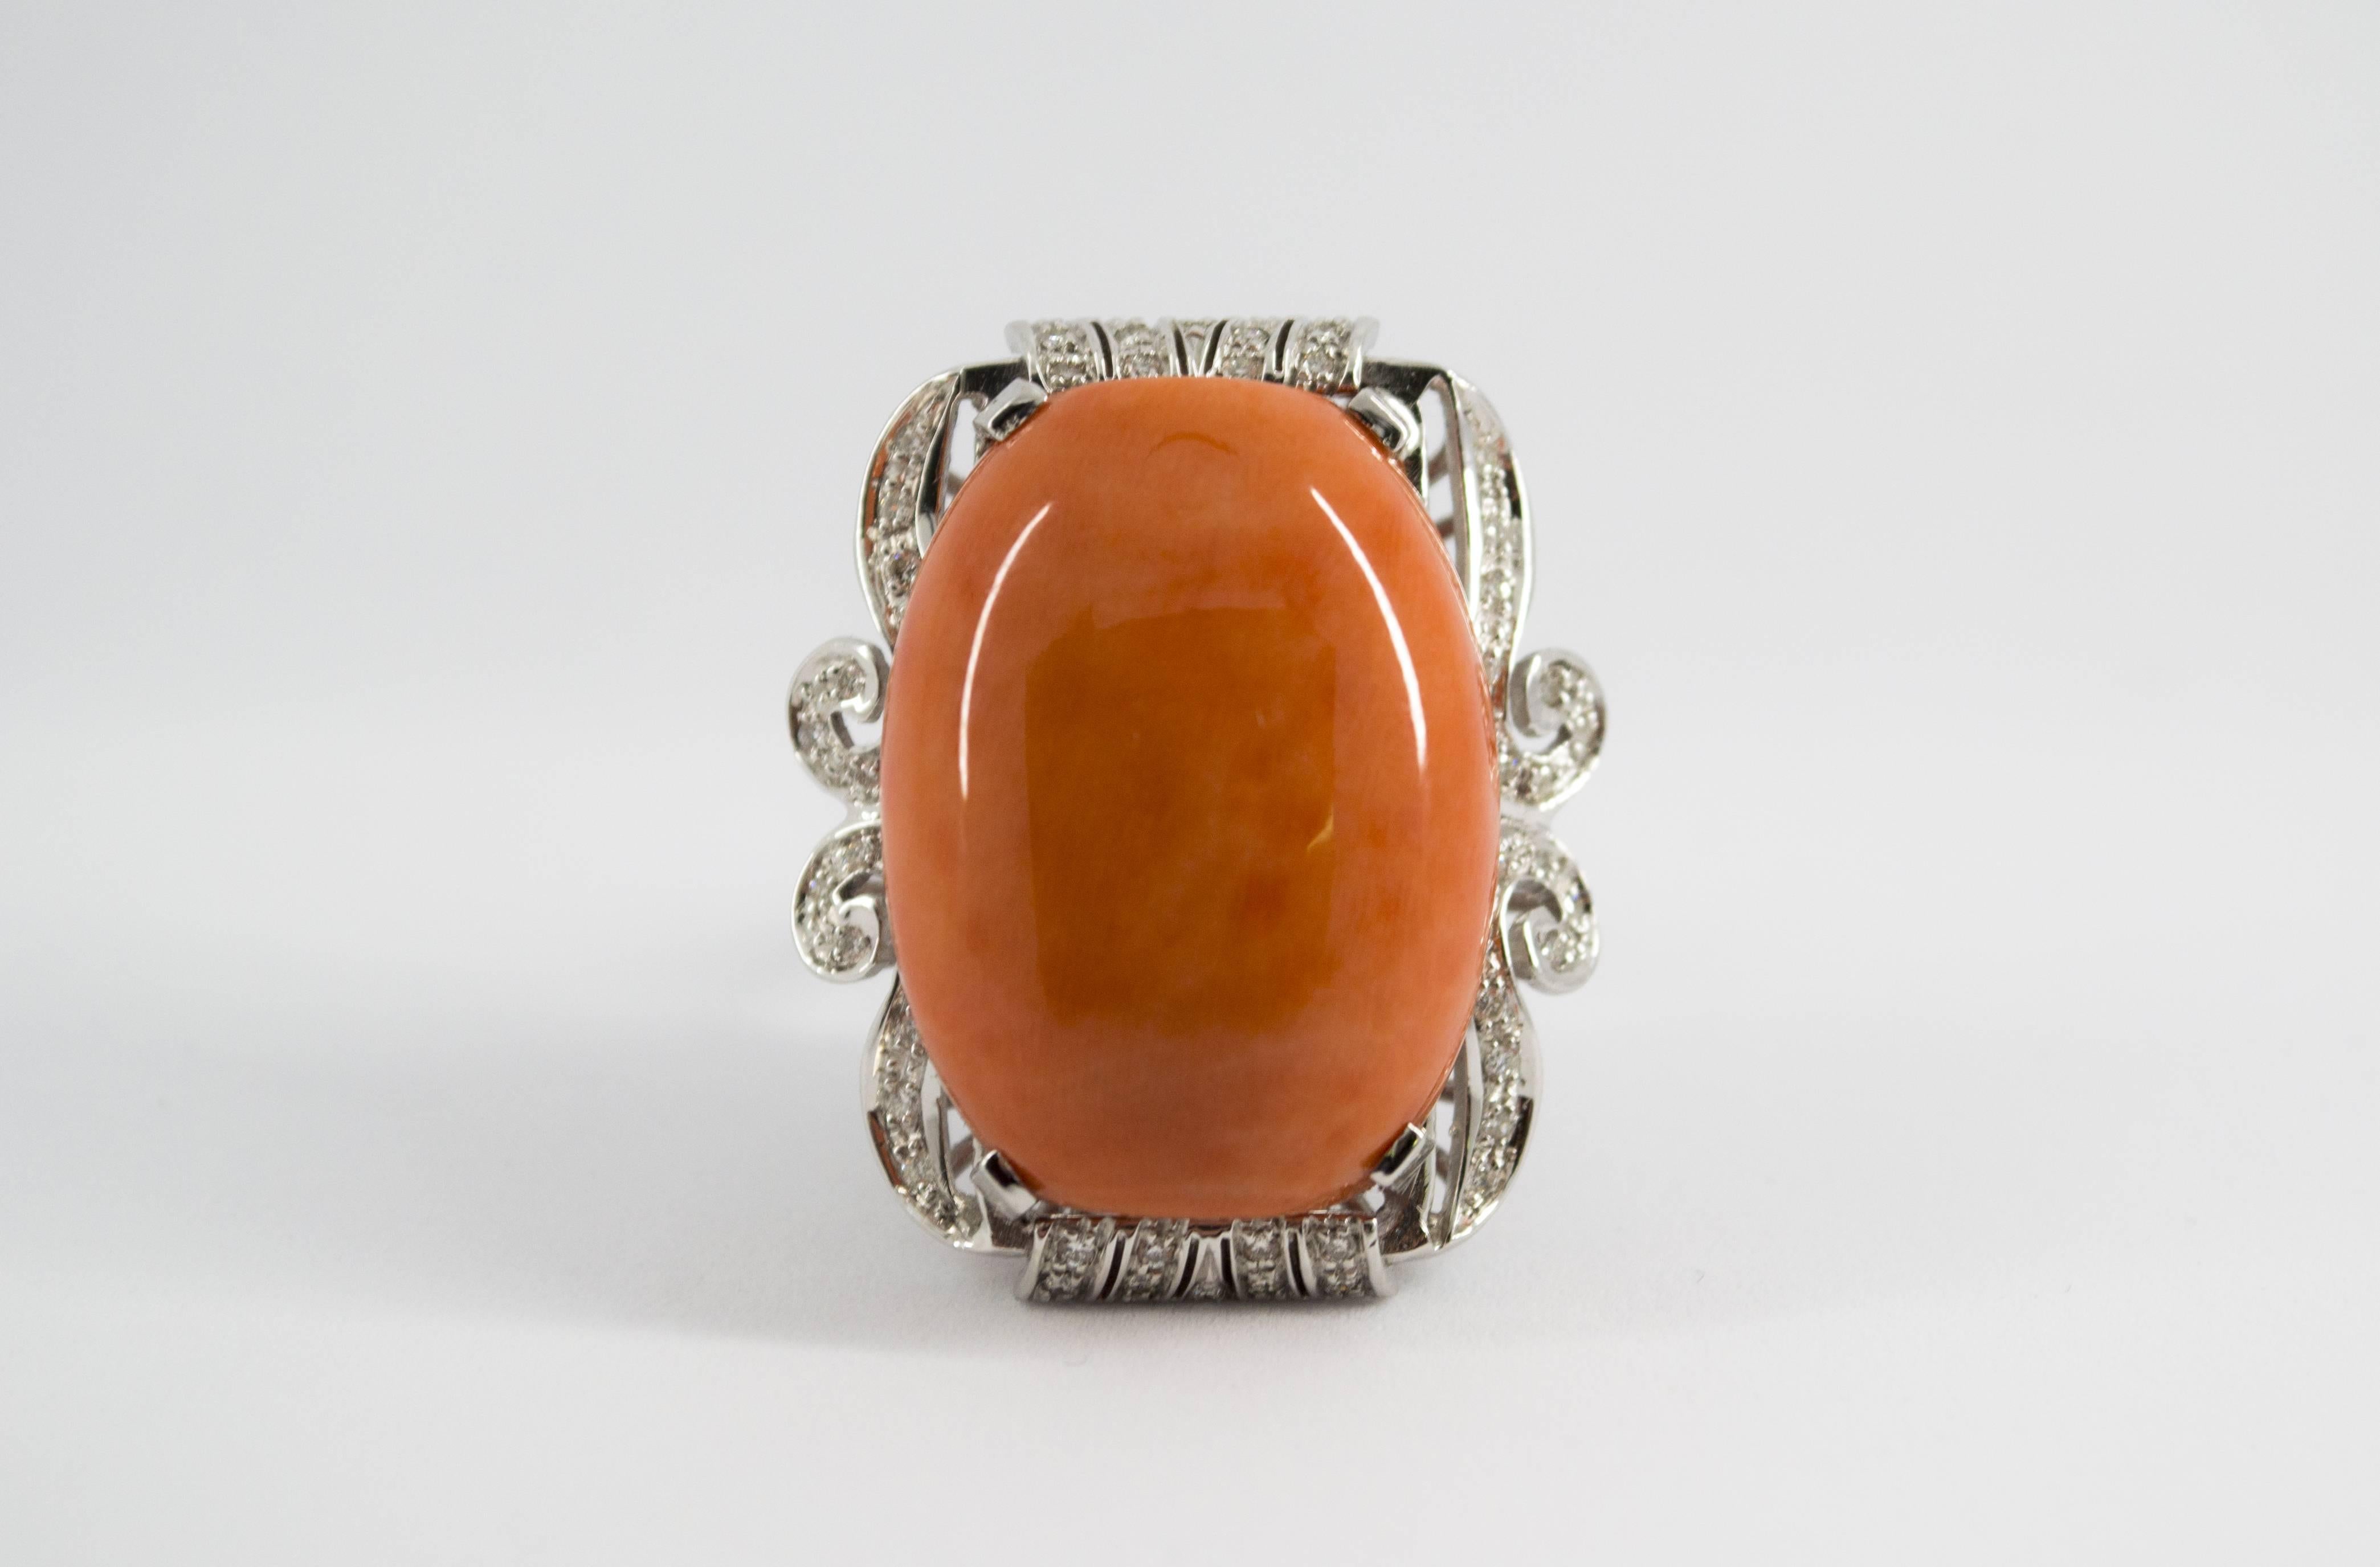 This Ring is made of 18K White Gold.
This Ring has 0.40 Carats of Diamonds.
This Ring has also Mediterranean (Sardinia, Italy) Peach Coral.
This Ring is inspired by Renaissance Style.
Size ITA: 18 USA: 8 1/4
We're a workshop so every piece is